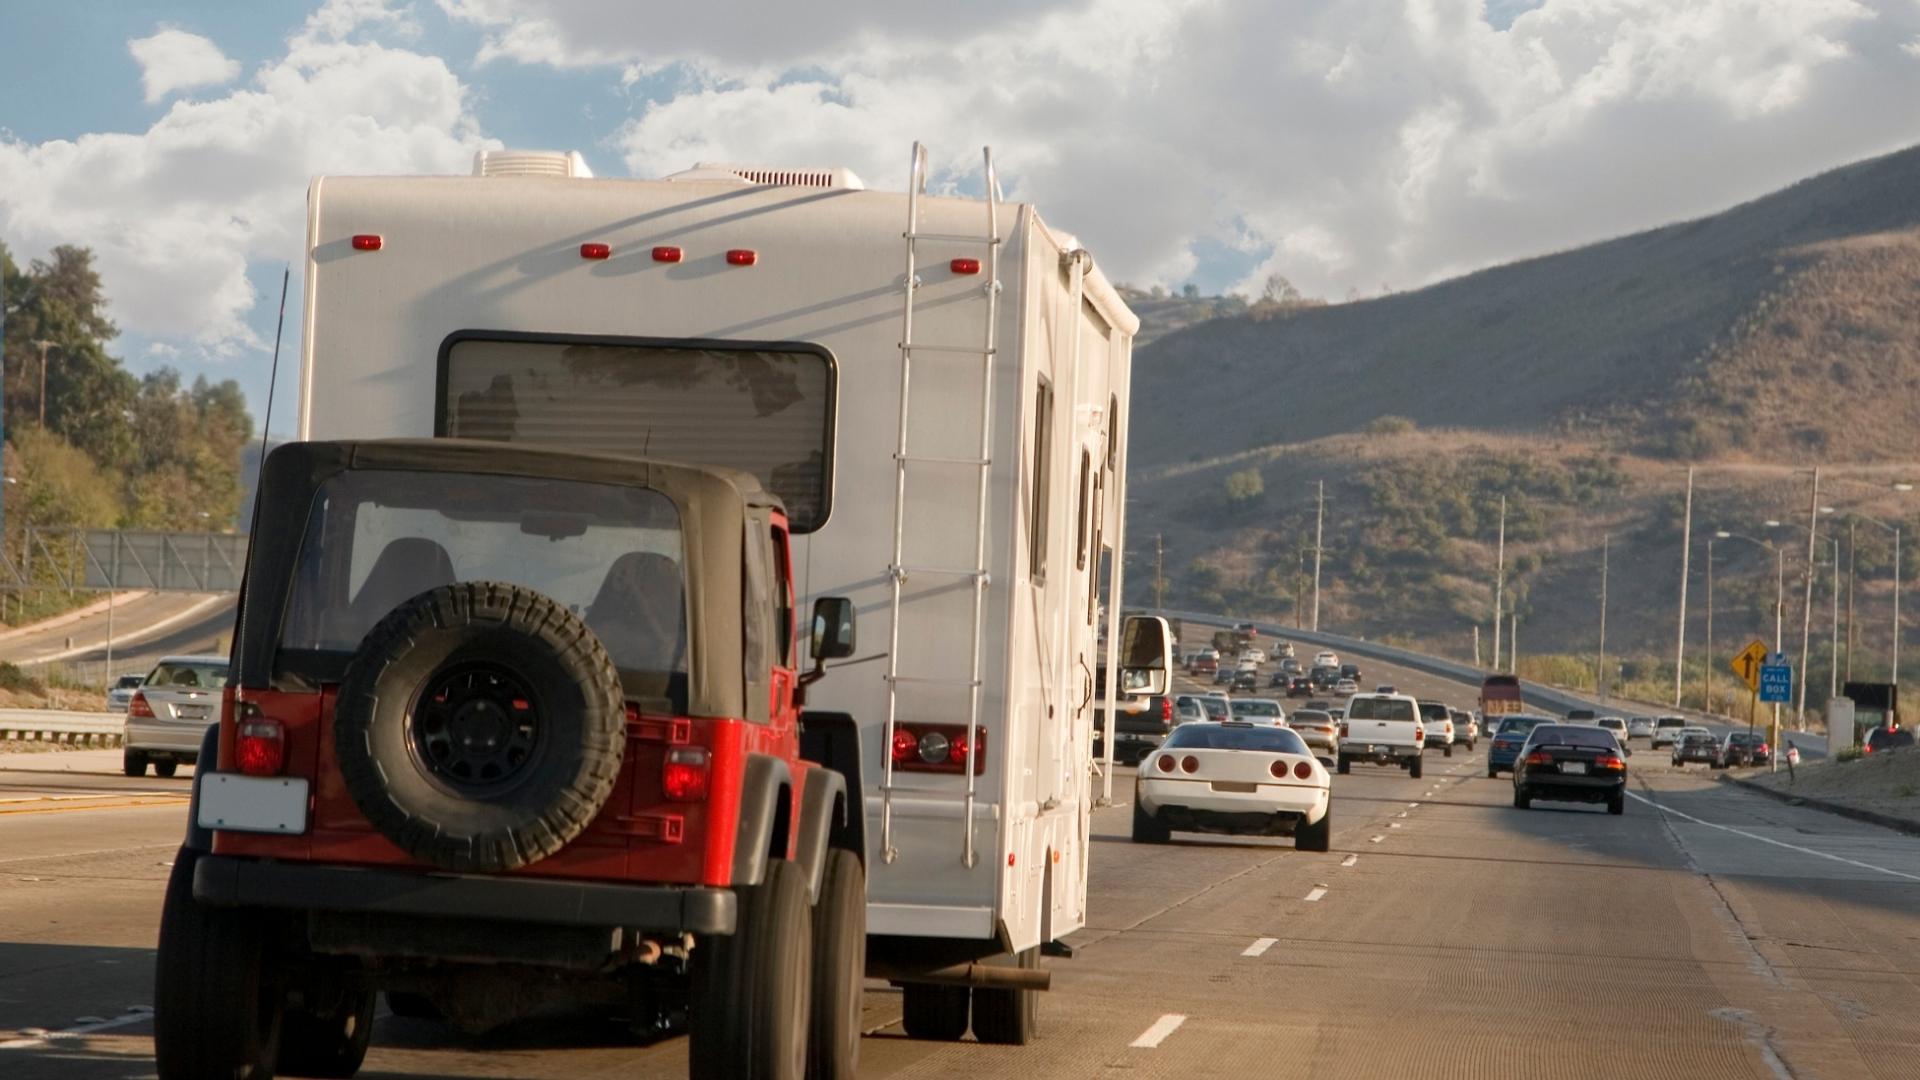 For trailer sway control, never overload a tow vehicle.